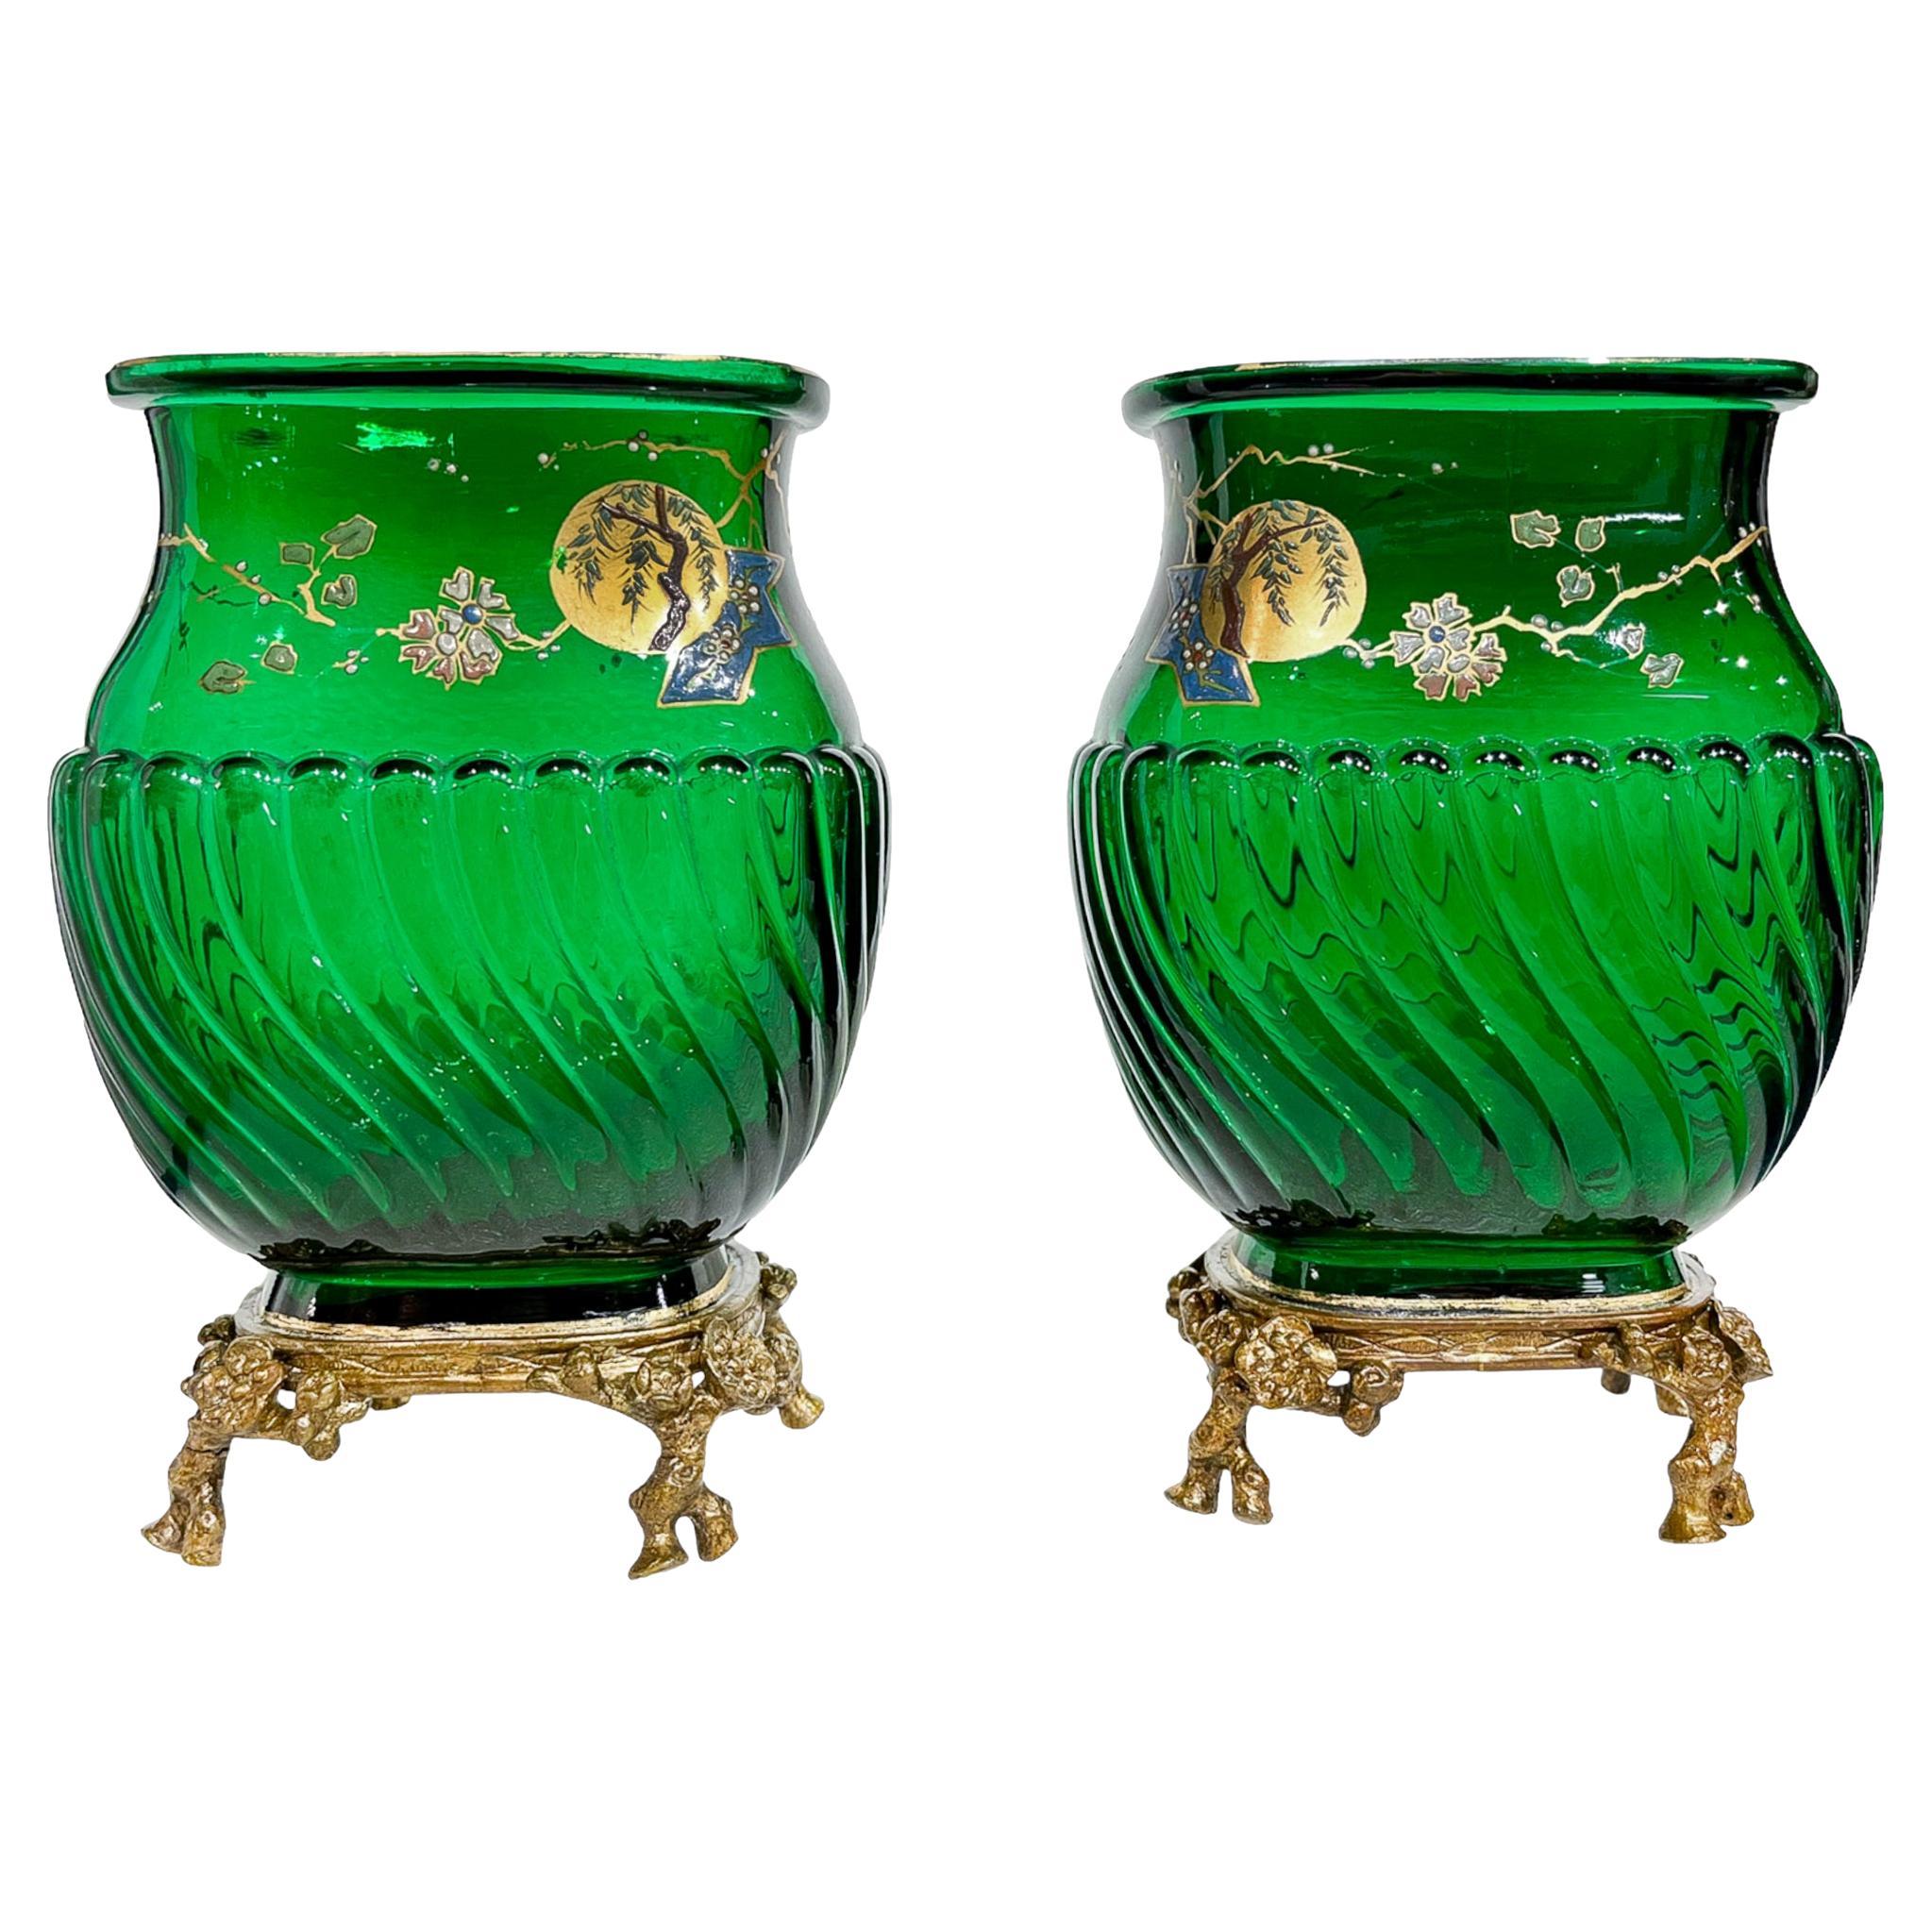 Baccarat Emerald Green Pair of Japonisme Vases with Enamel Sakura Tree and Sun 